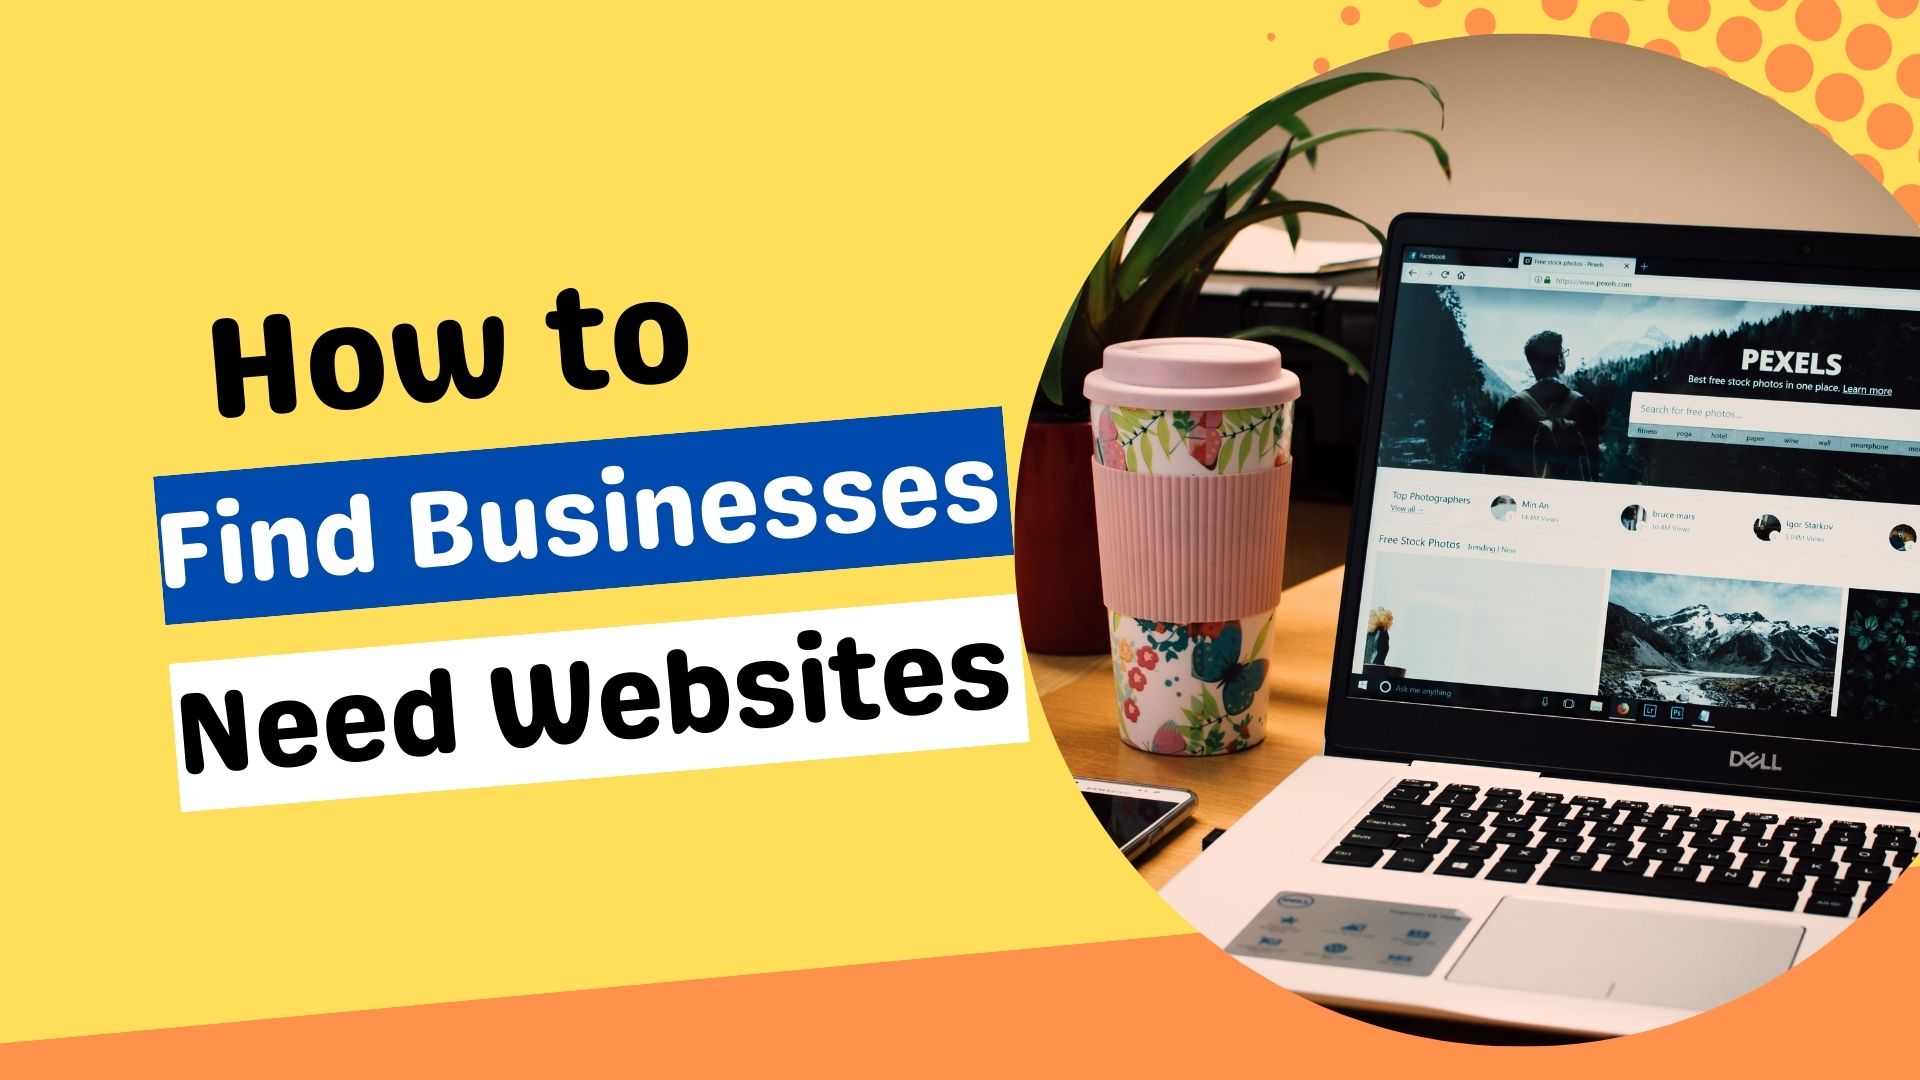 How to Find Businesses That Need Websites